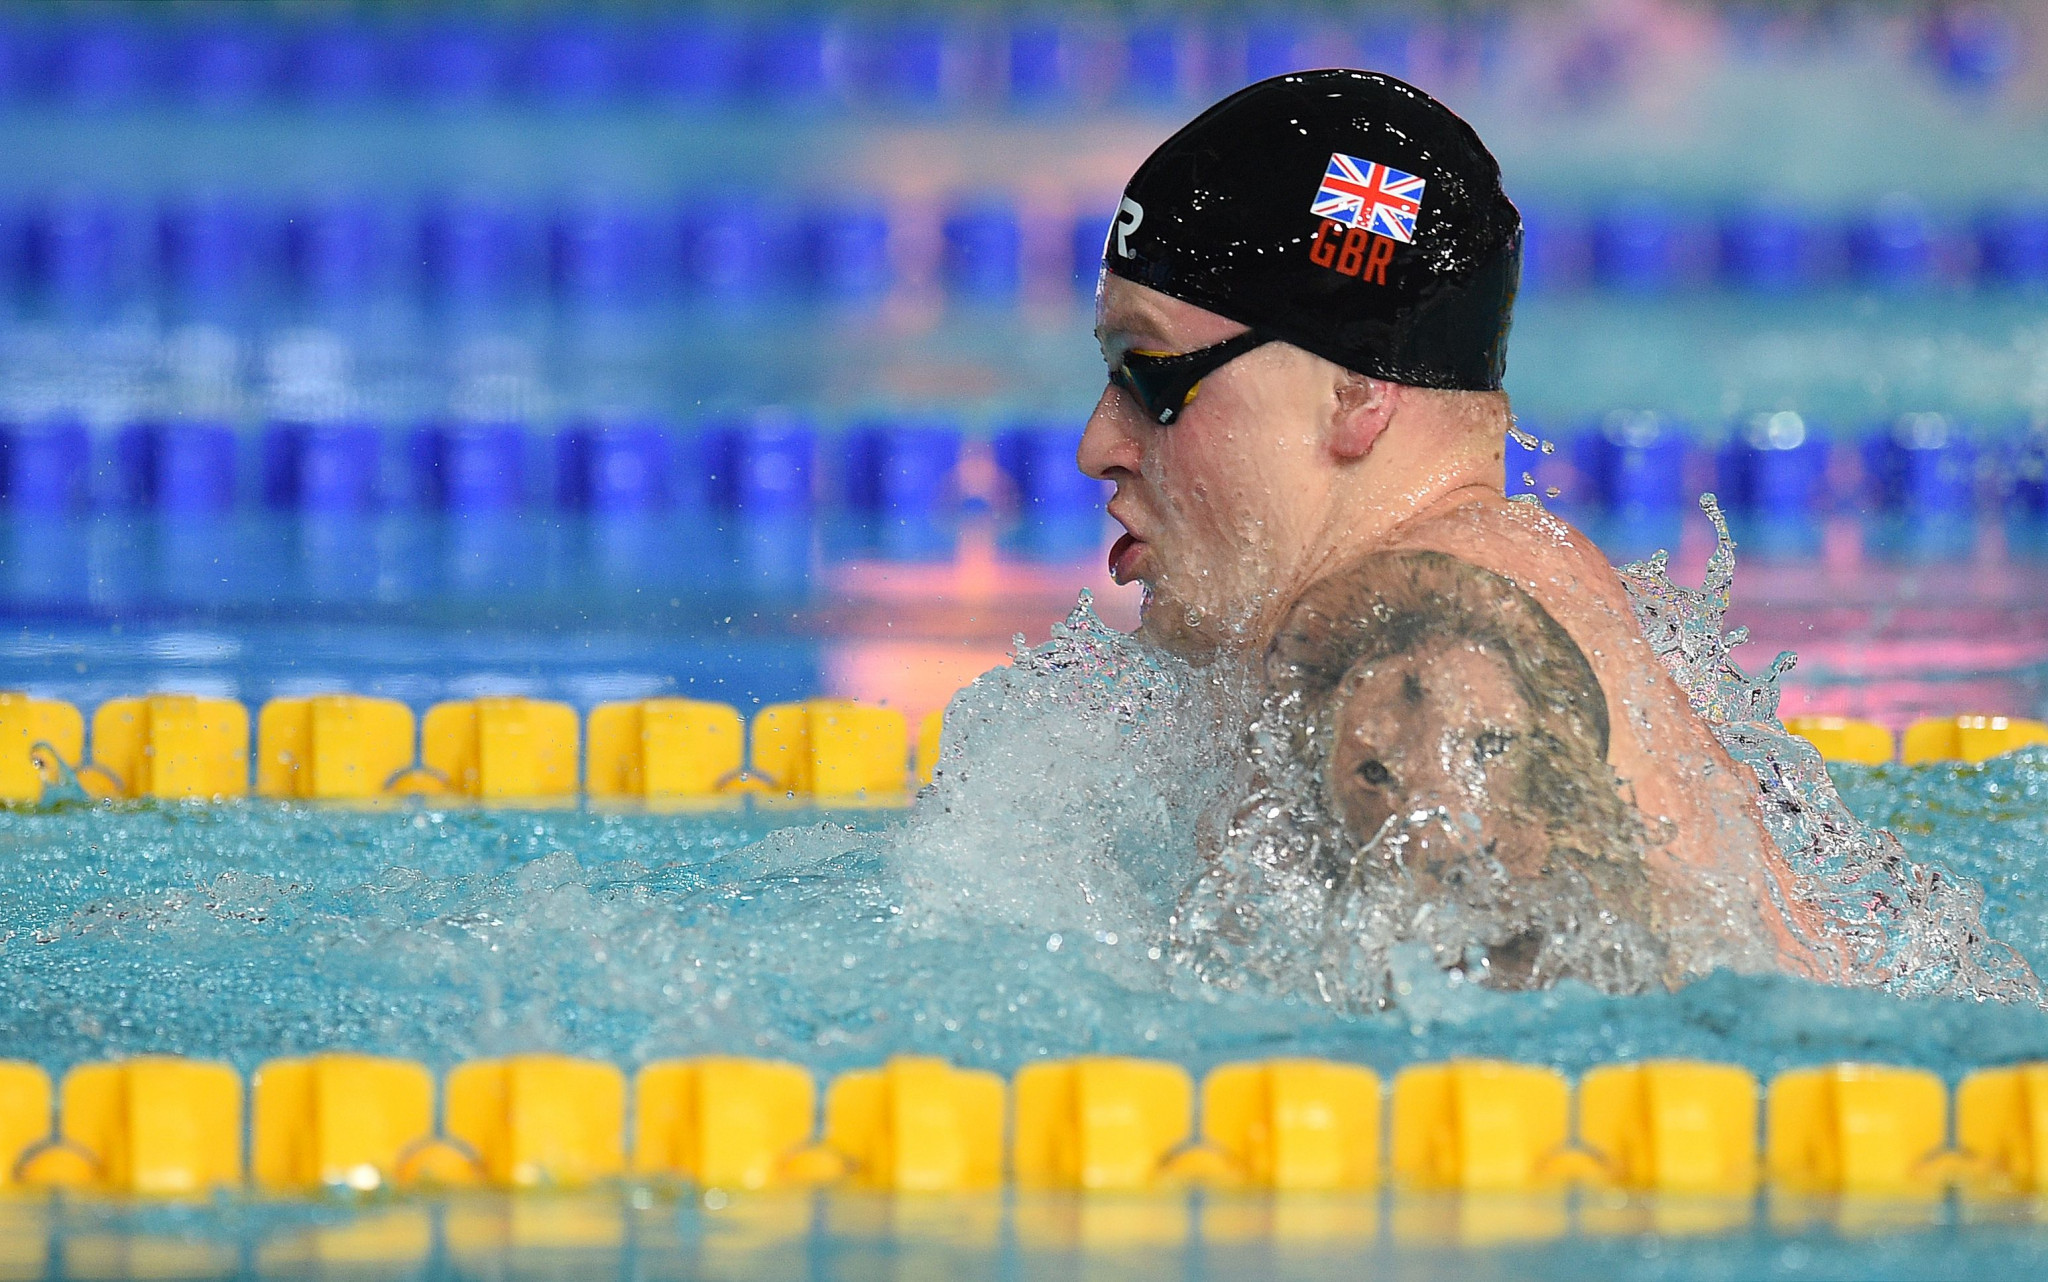 Britain's Adam Peaty is among the high profile athletes expected to take part in Turin ©Getty Images